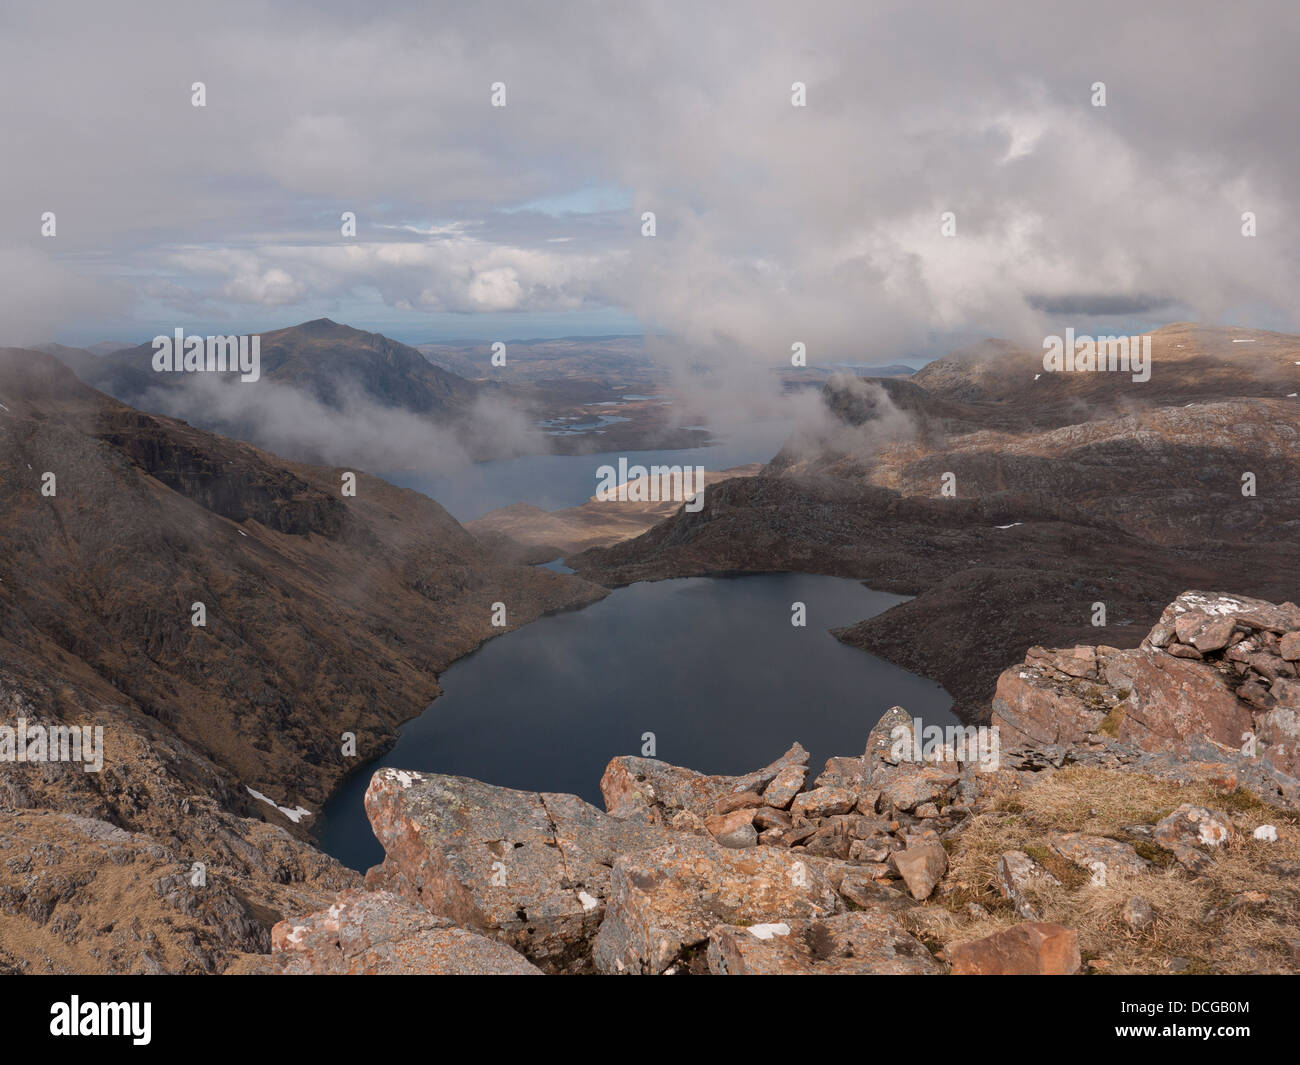 Summit view from Ruadh Stac Mor with Fuar Loch Mor below and mountain Beinn Airigh Charr in the distance, Scotland UK Stock Photo